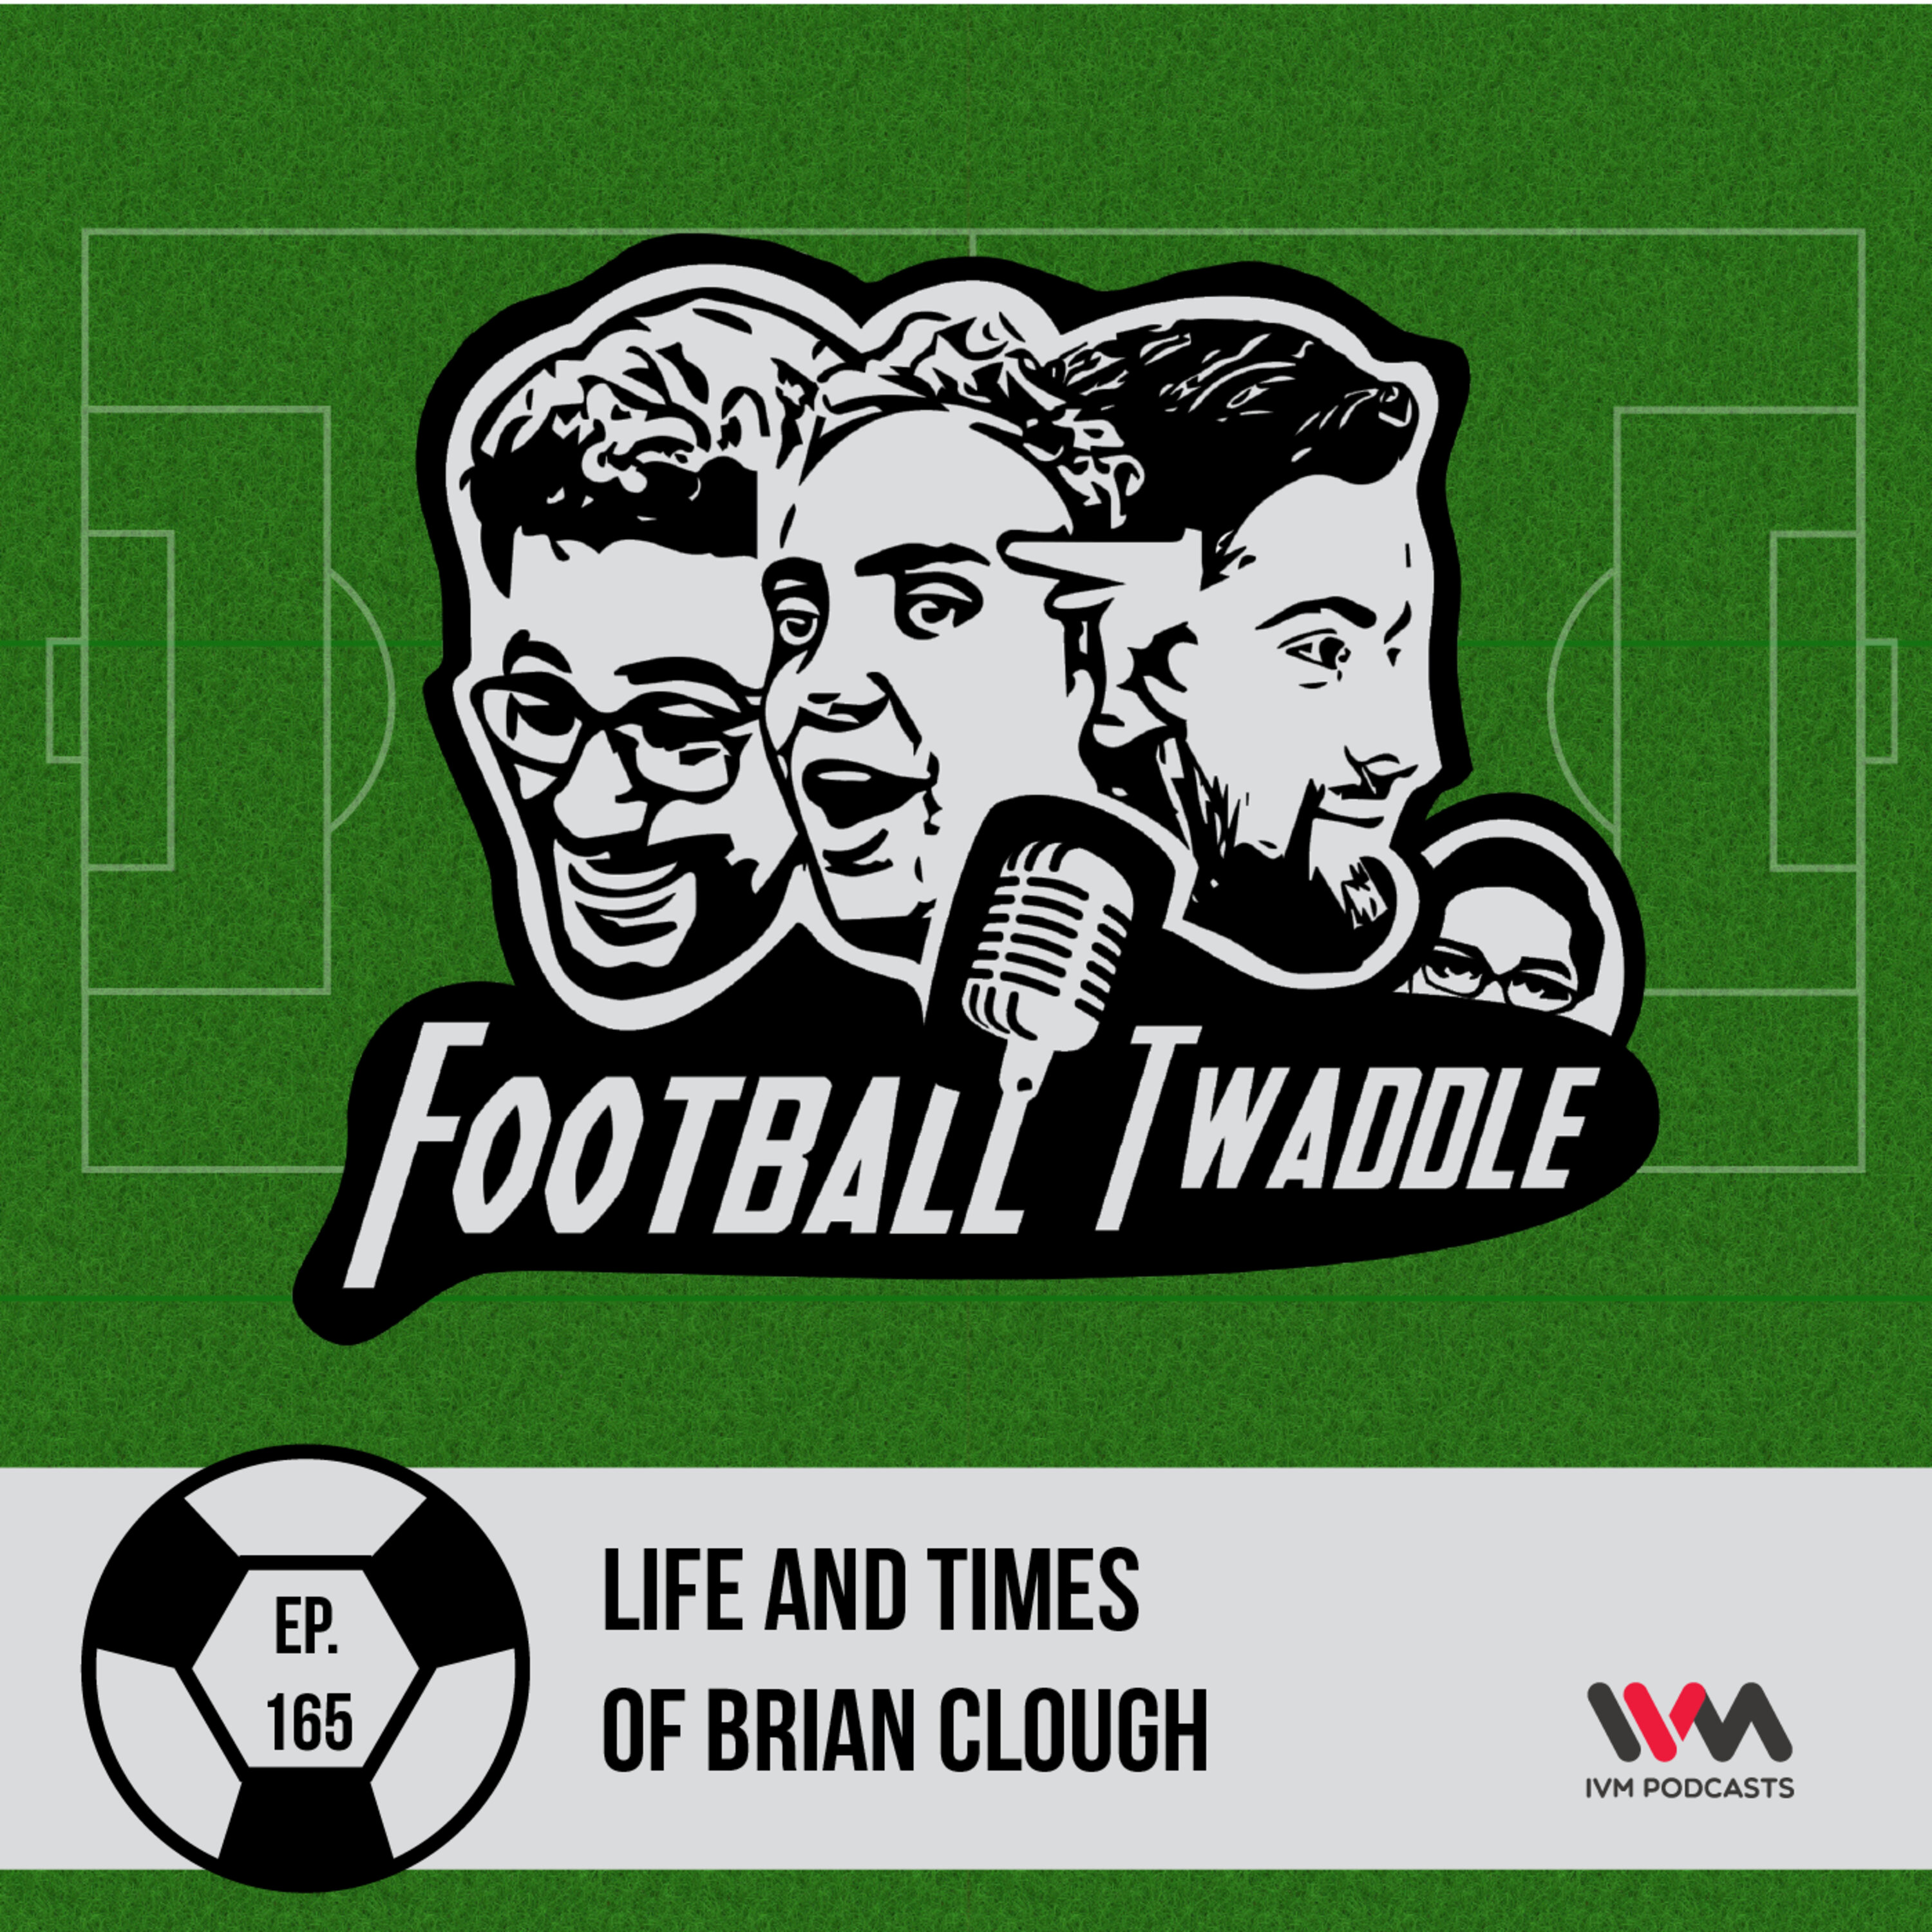 Life and times of Brian Clough